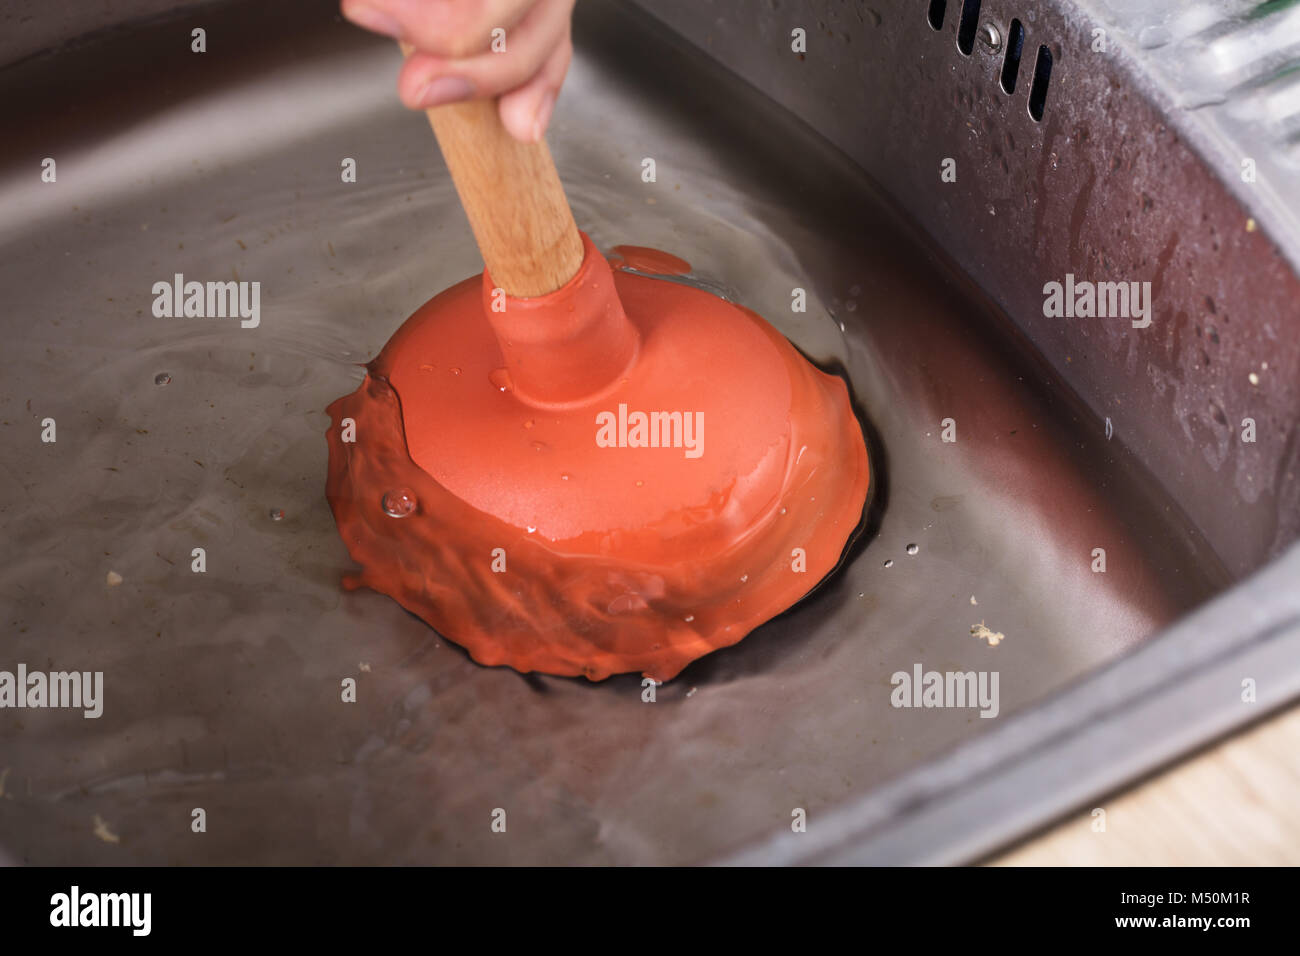 Premium Photo  Kitchen sink full of dirty water red plunger